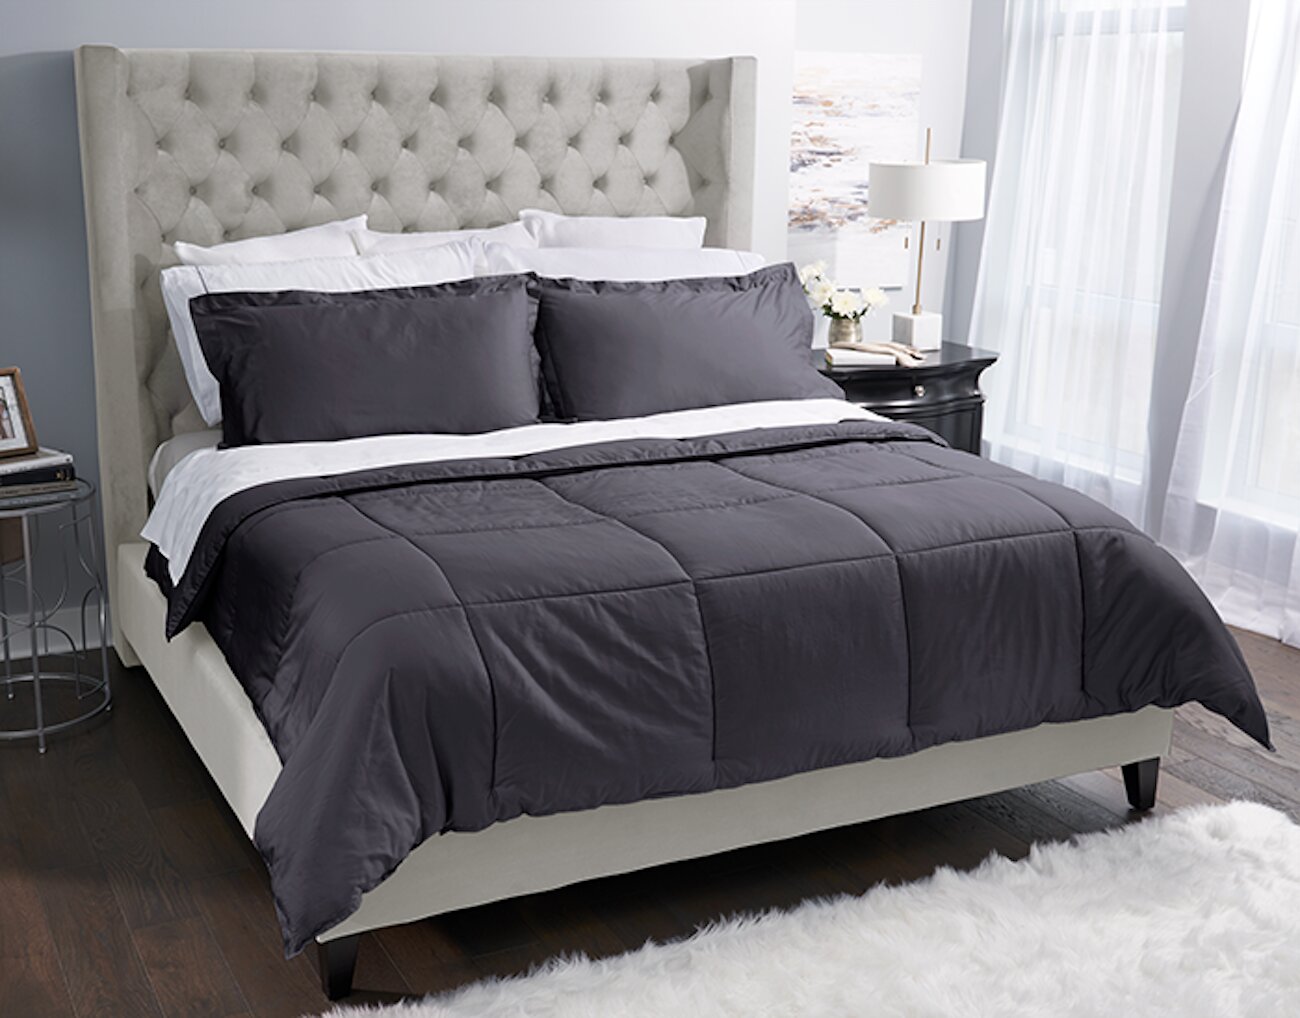 Better Bedder, Bedding, Making Queen Bed Easy Size Holds Your Bed Sheets  In Place In Original Wrap